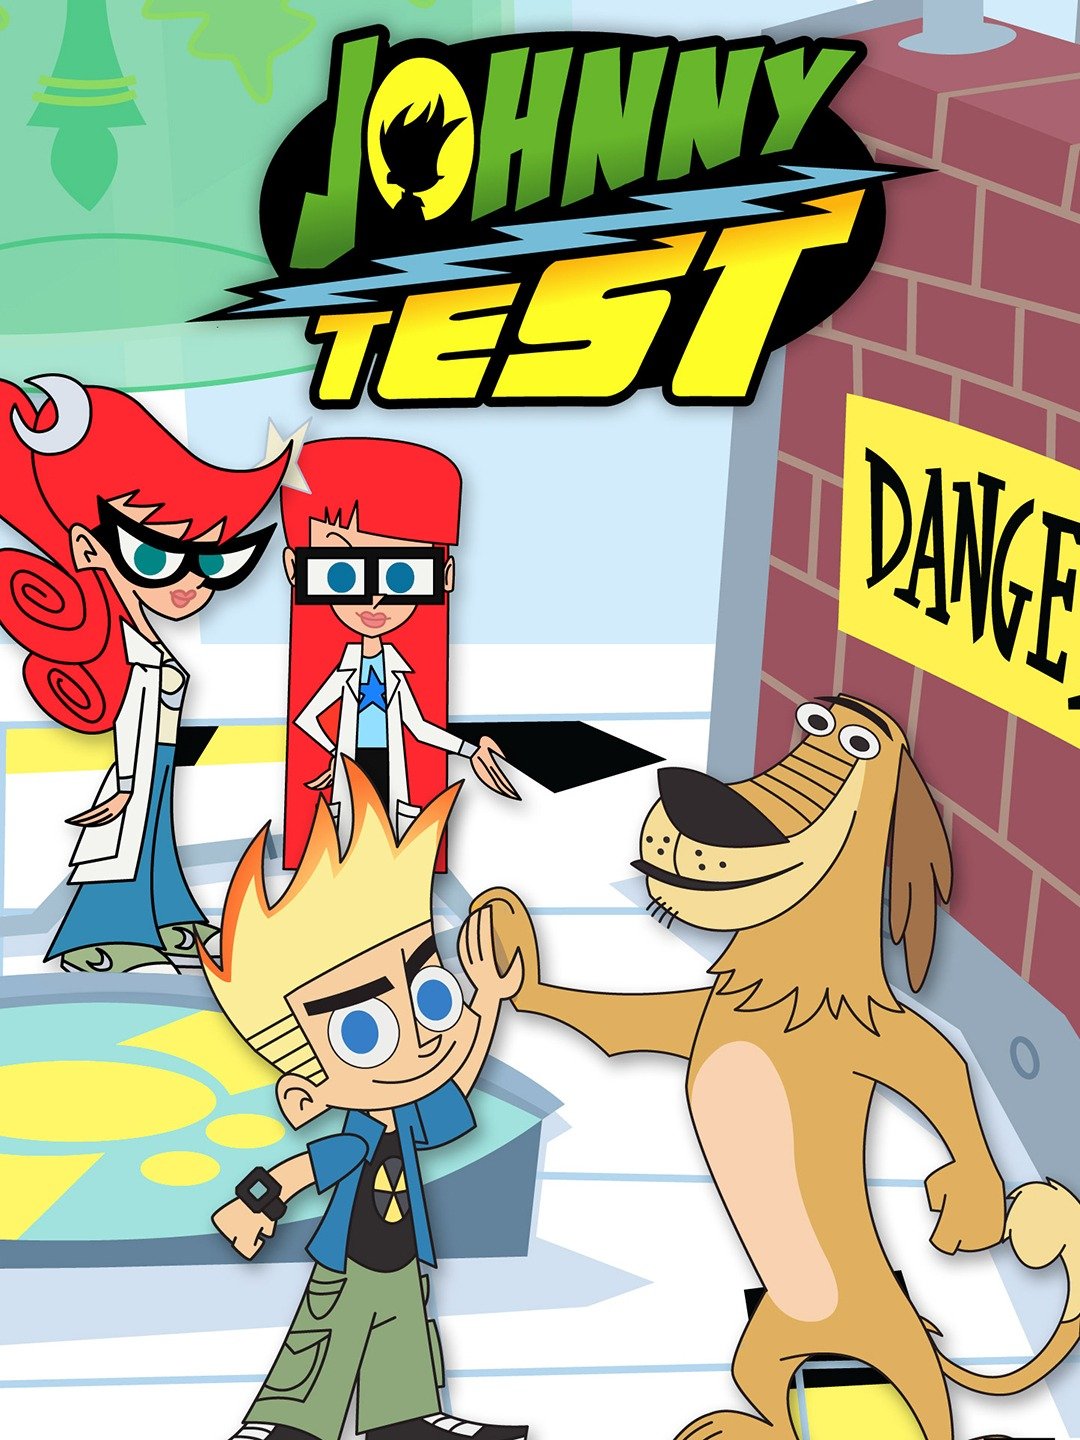 1080px x 1440px - Johnny Test - Rotten Tomatoes